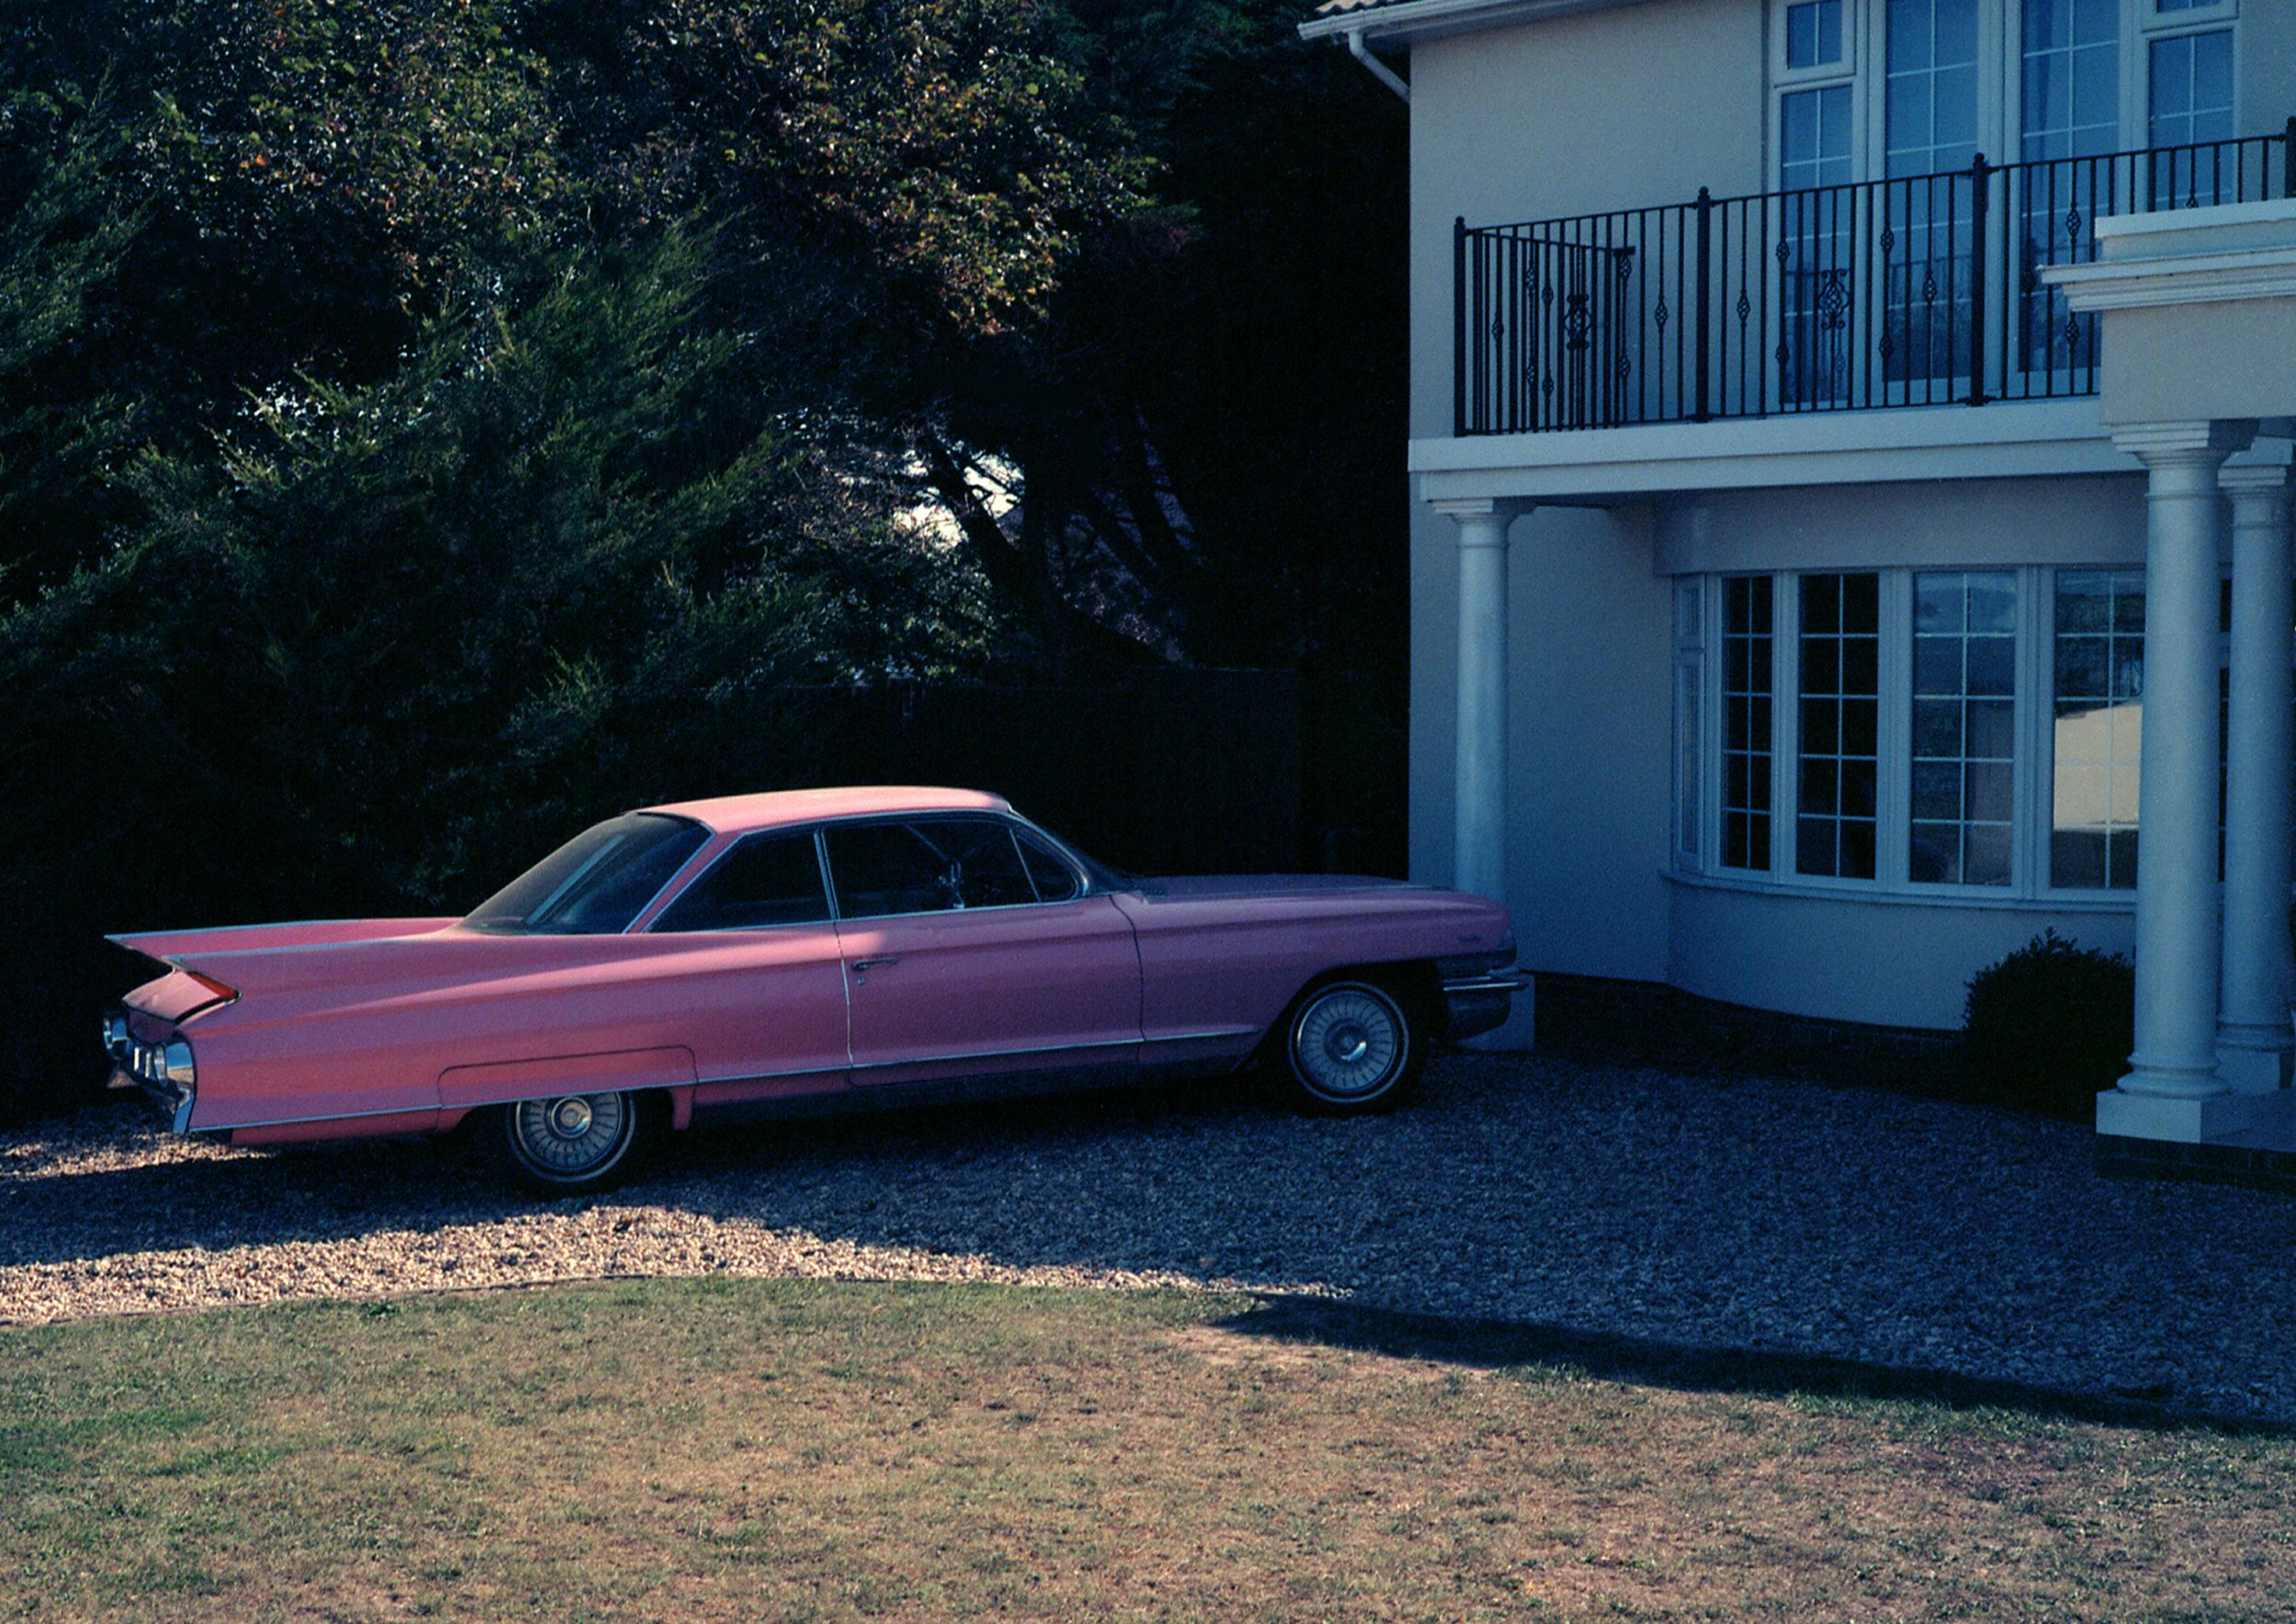  1959 Pink Cadillac in Margate - UK 